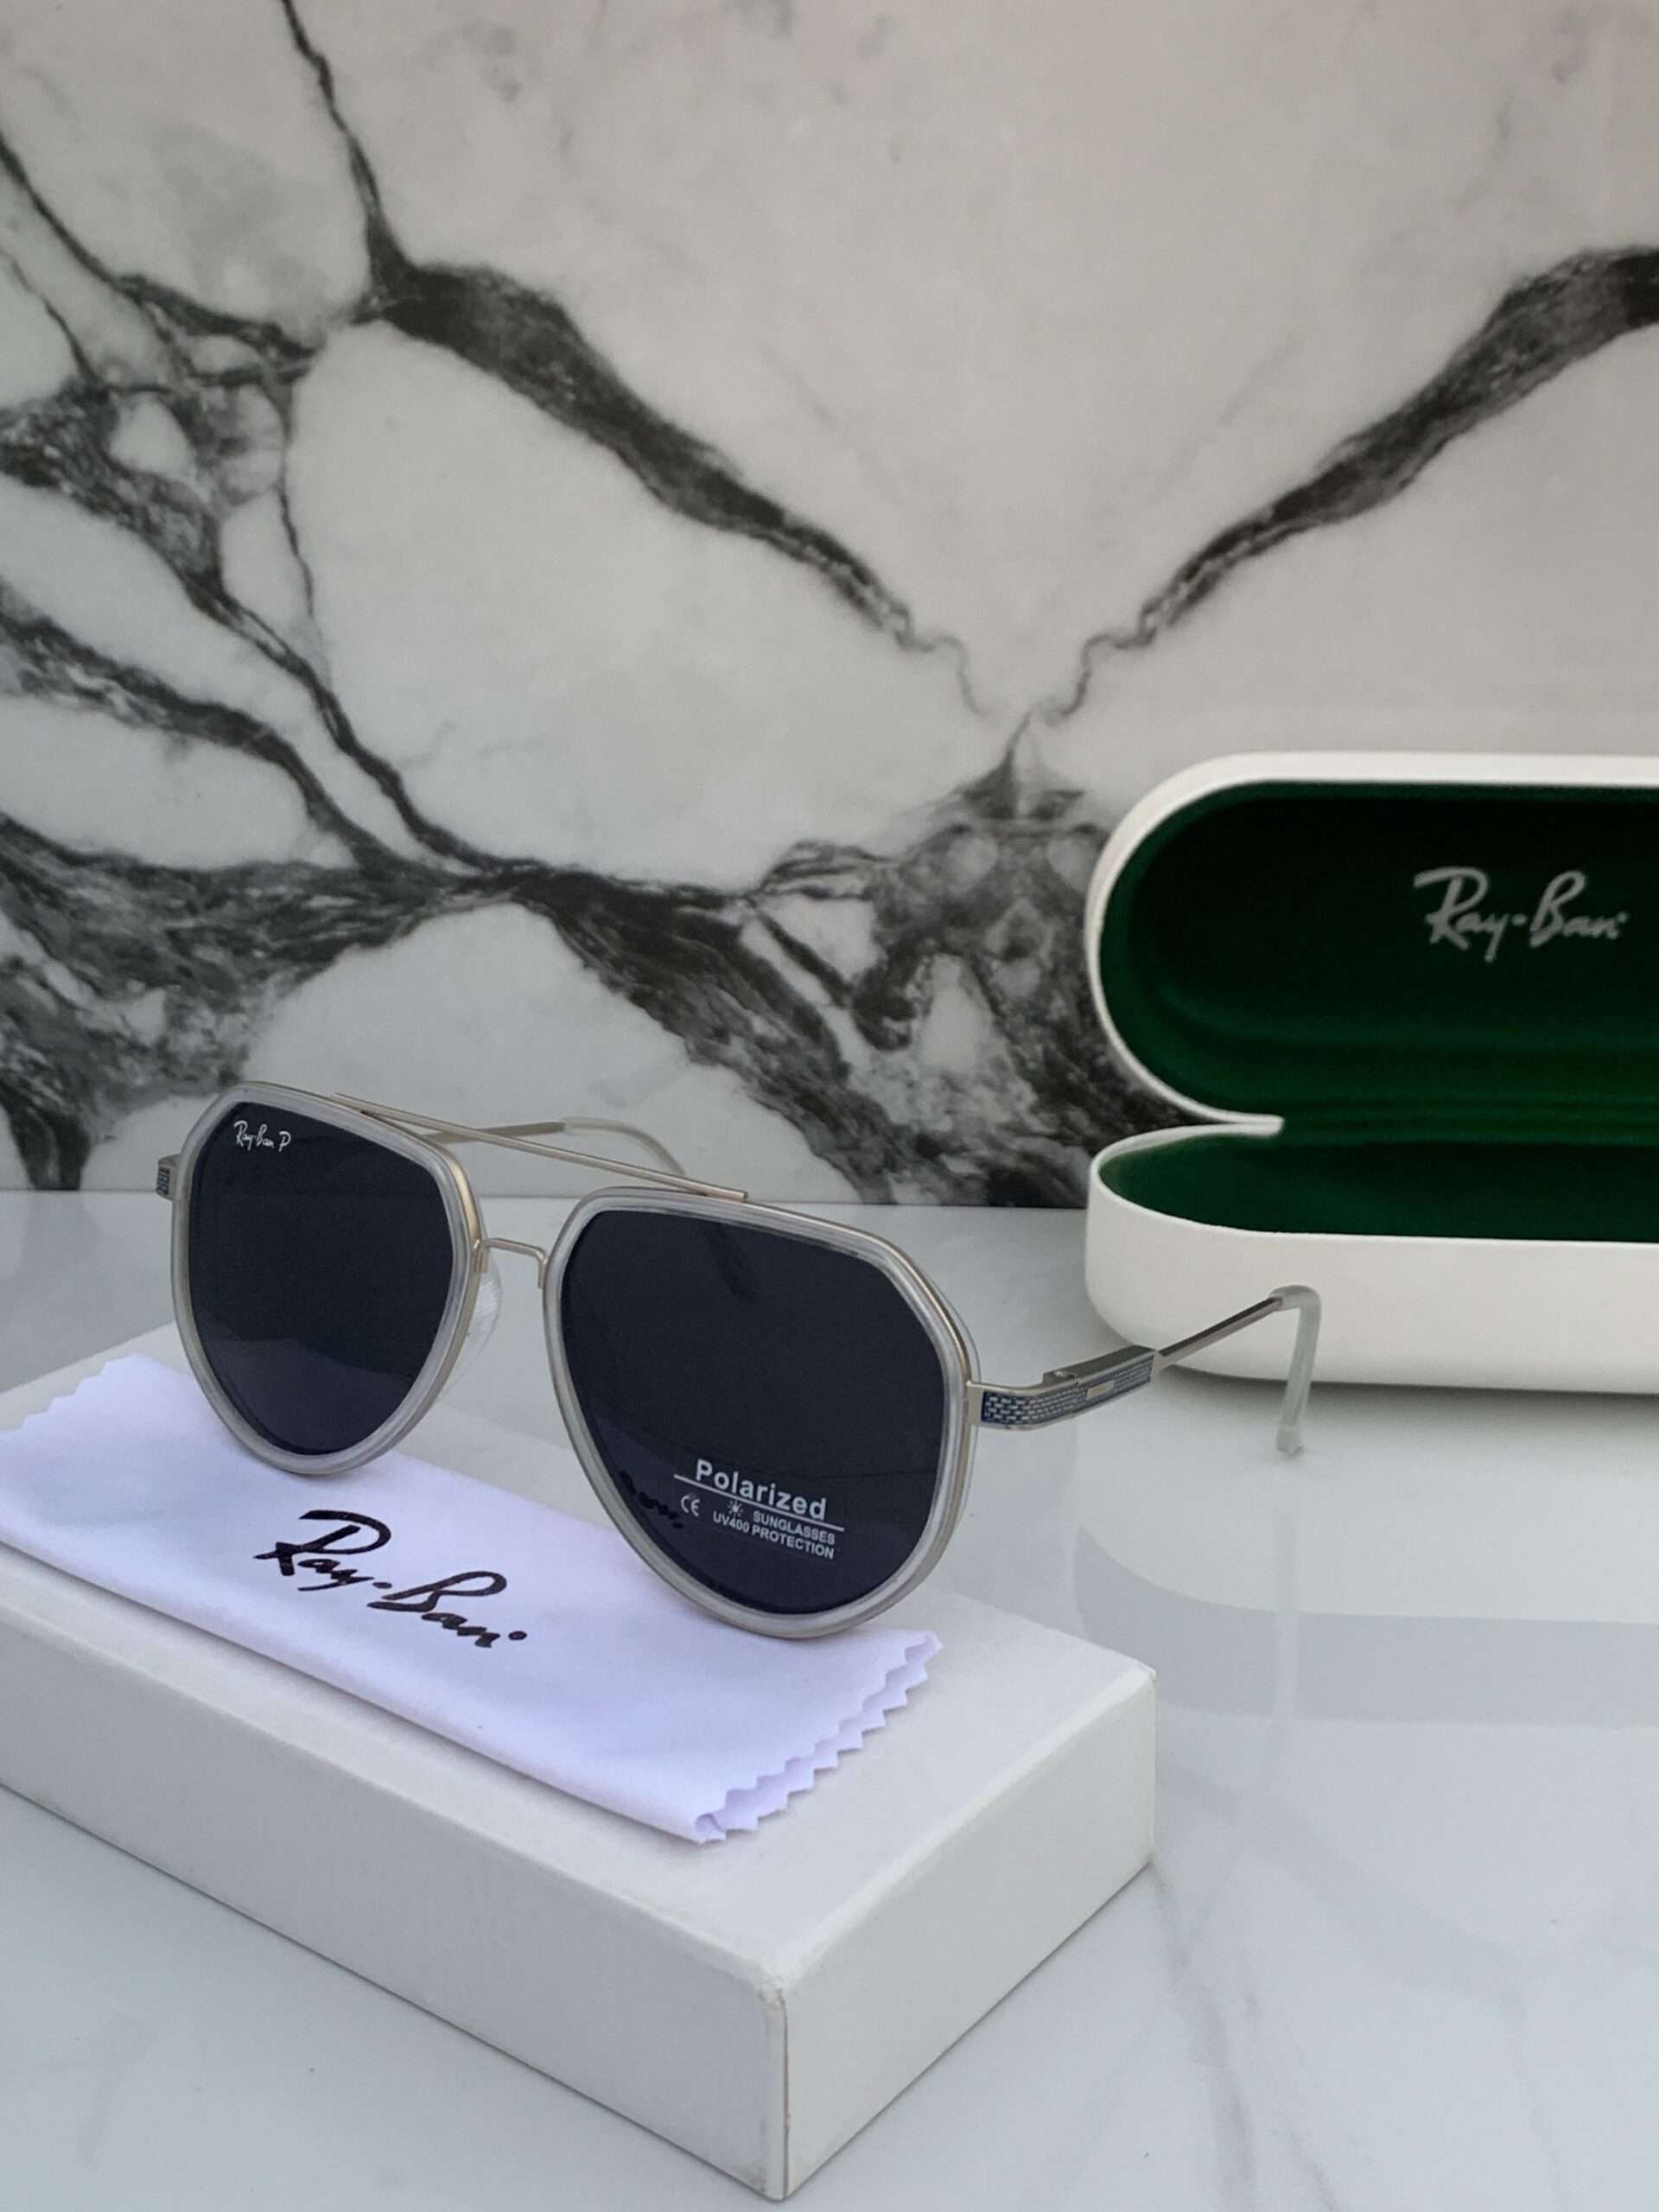 Replica Lacoste Fashion Sunglasses with High quality